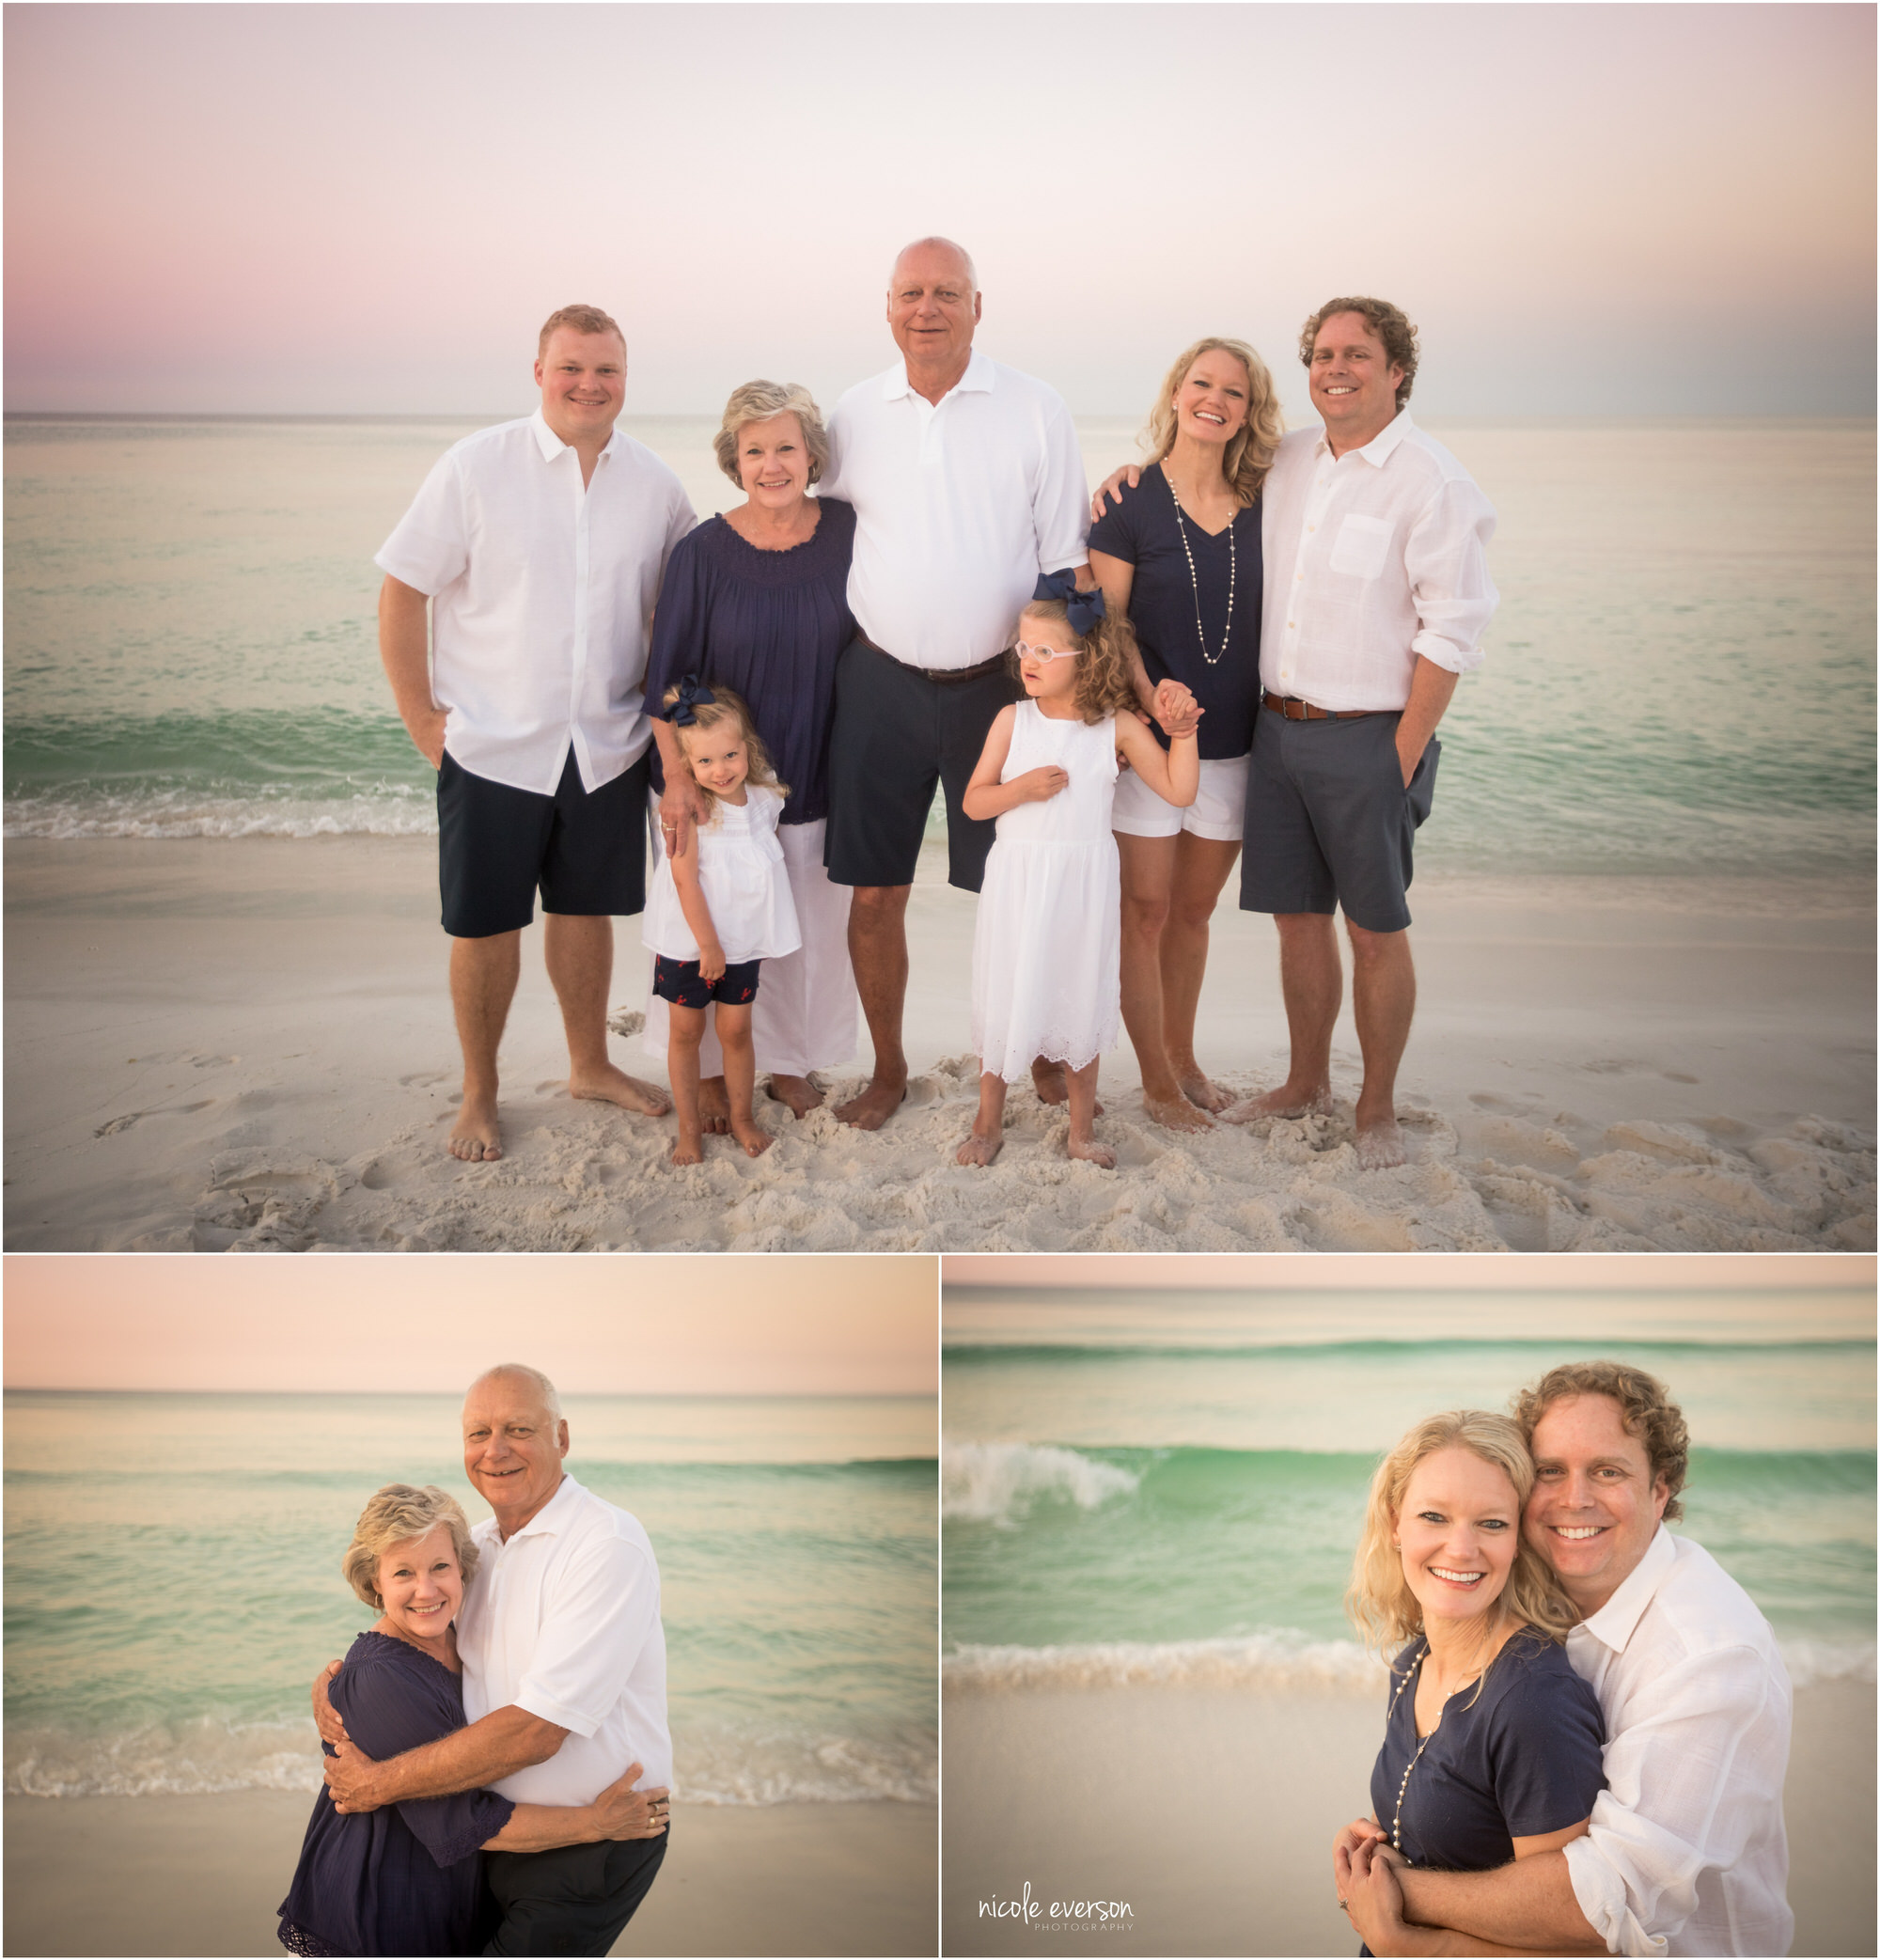 4 Tips for a Family Beach Photoshoot - christinedeatoncreative.com